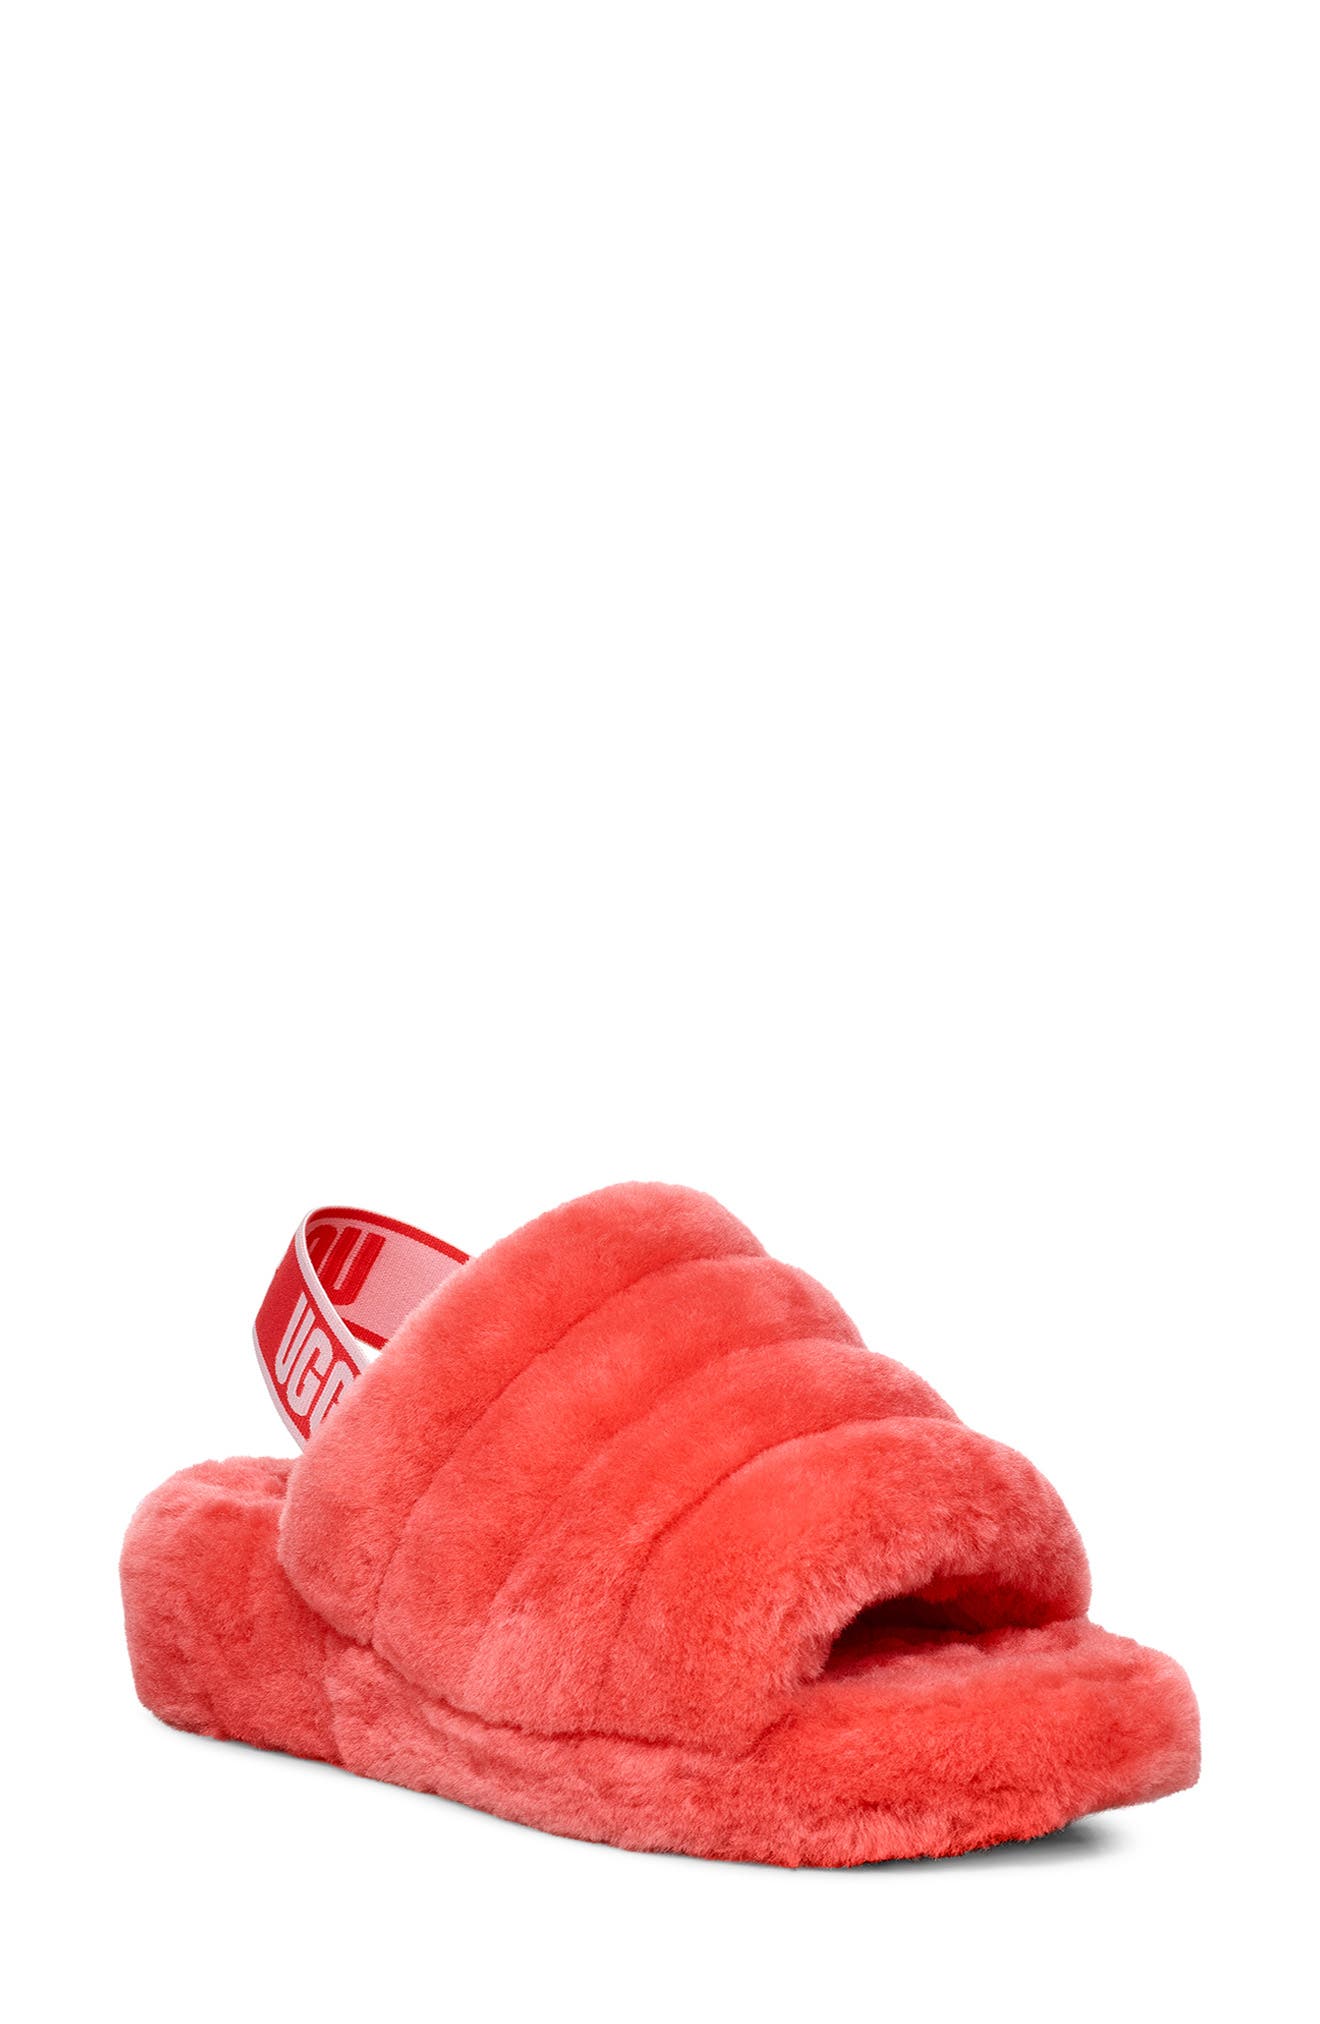 red ugg womens slippers